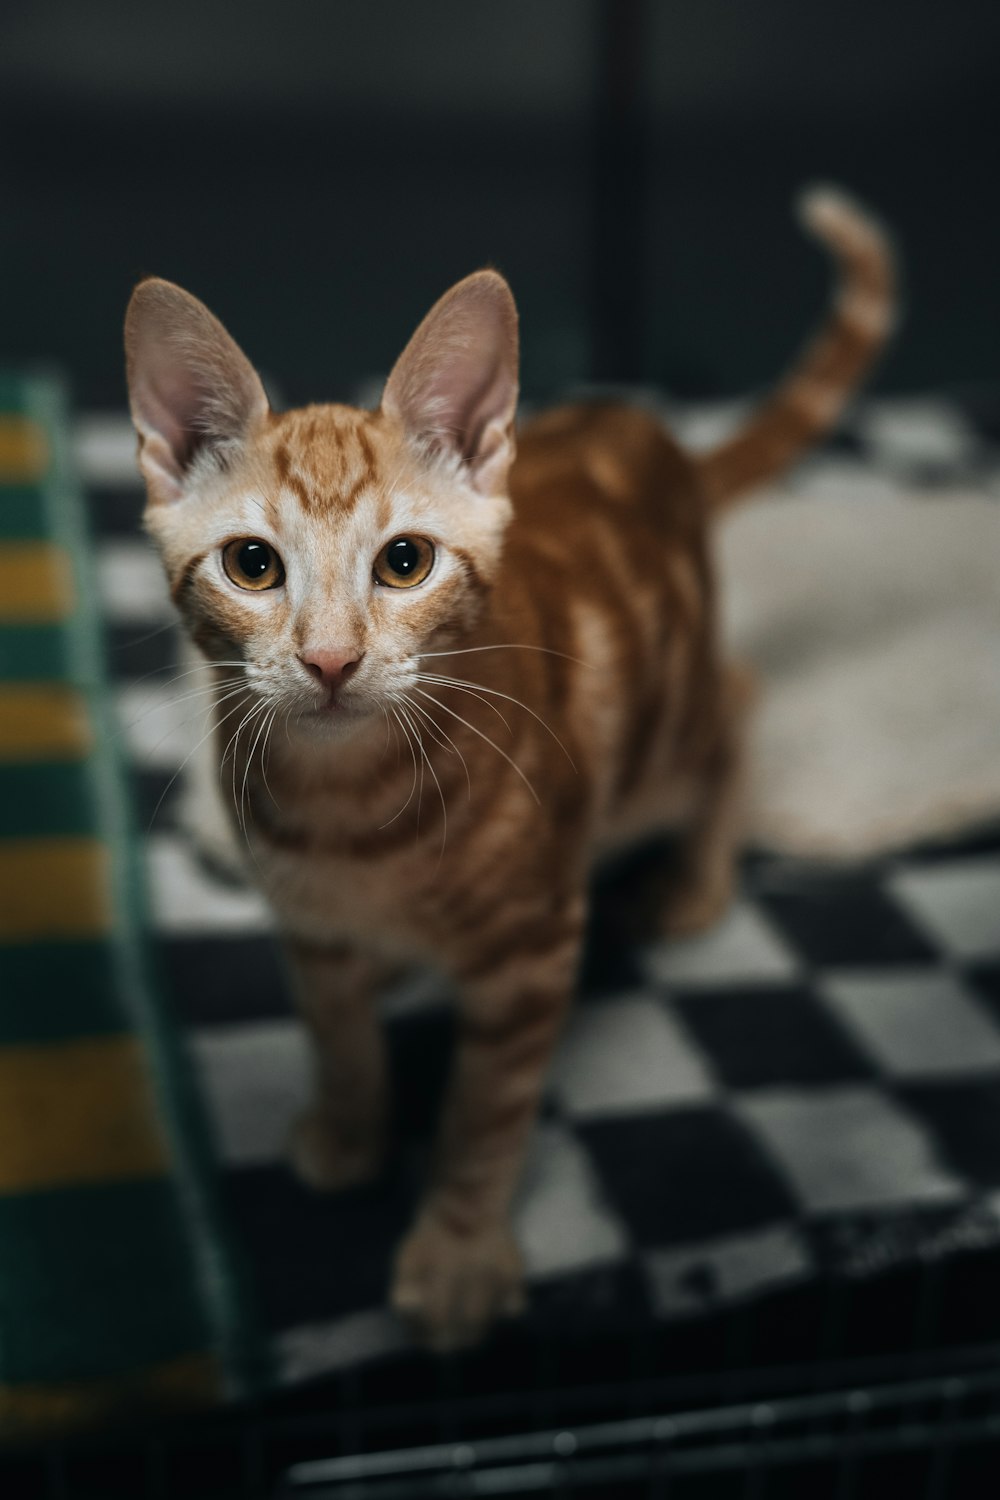 a small kitten standing on a checkered surface